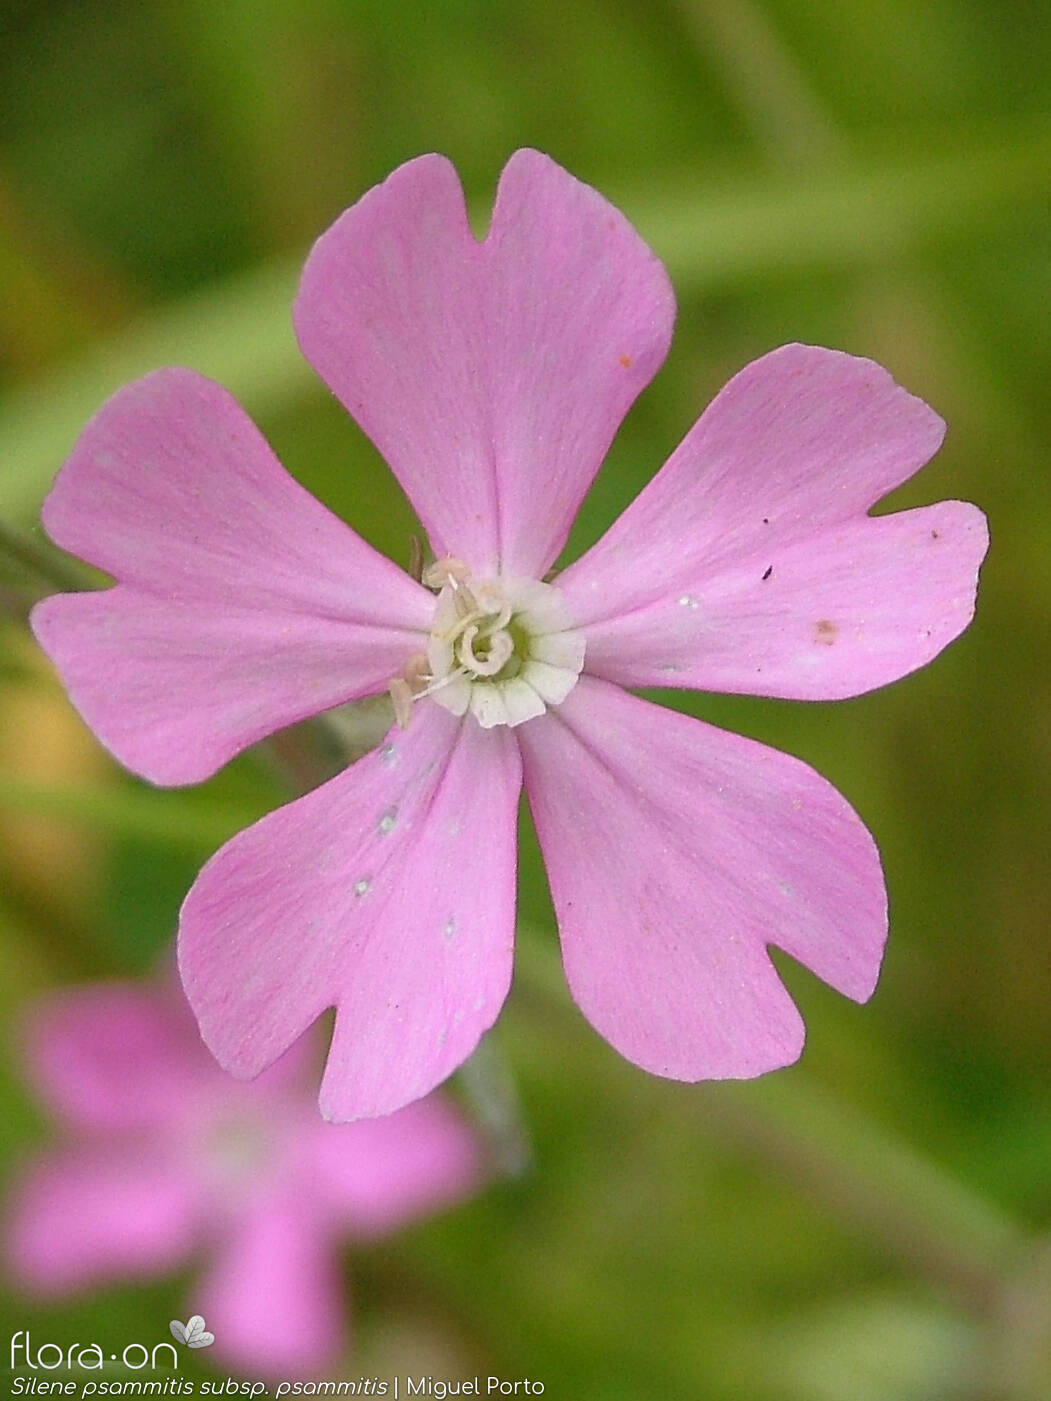 Silene psammitis psammitis - Flor (close-up) | Miguel Porto; CC BY-NC 4.0